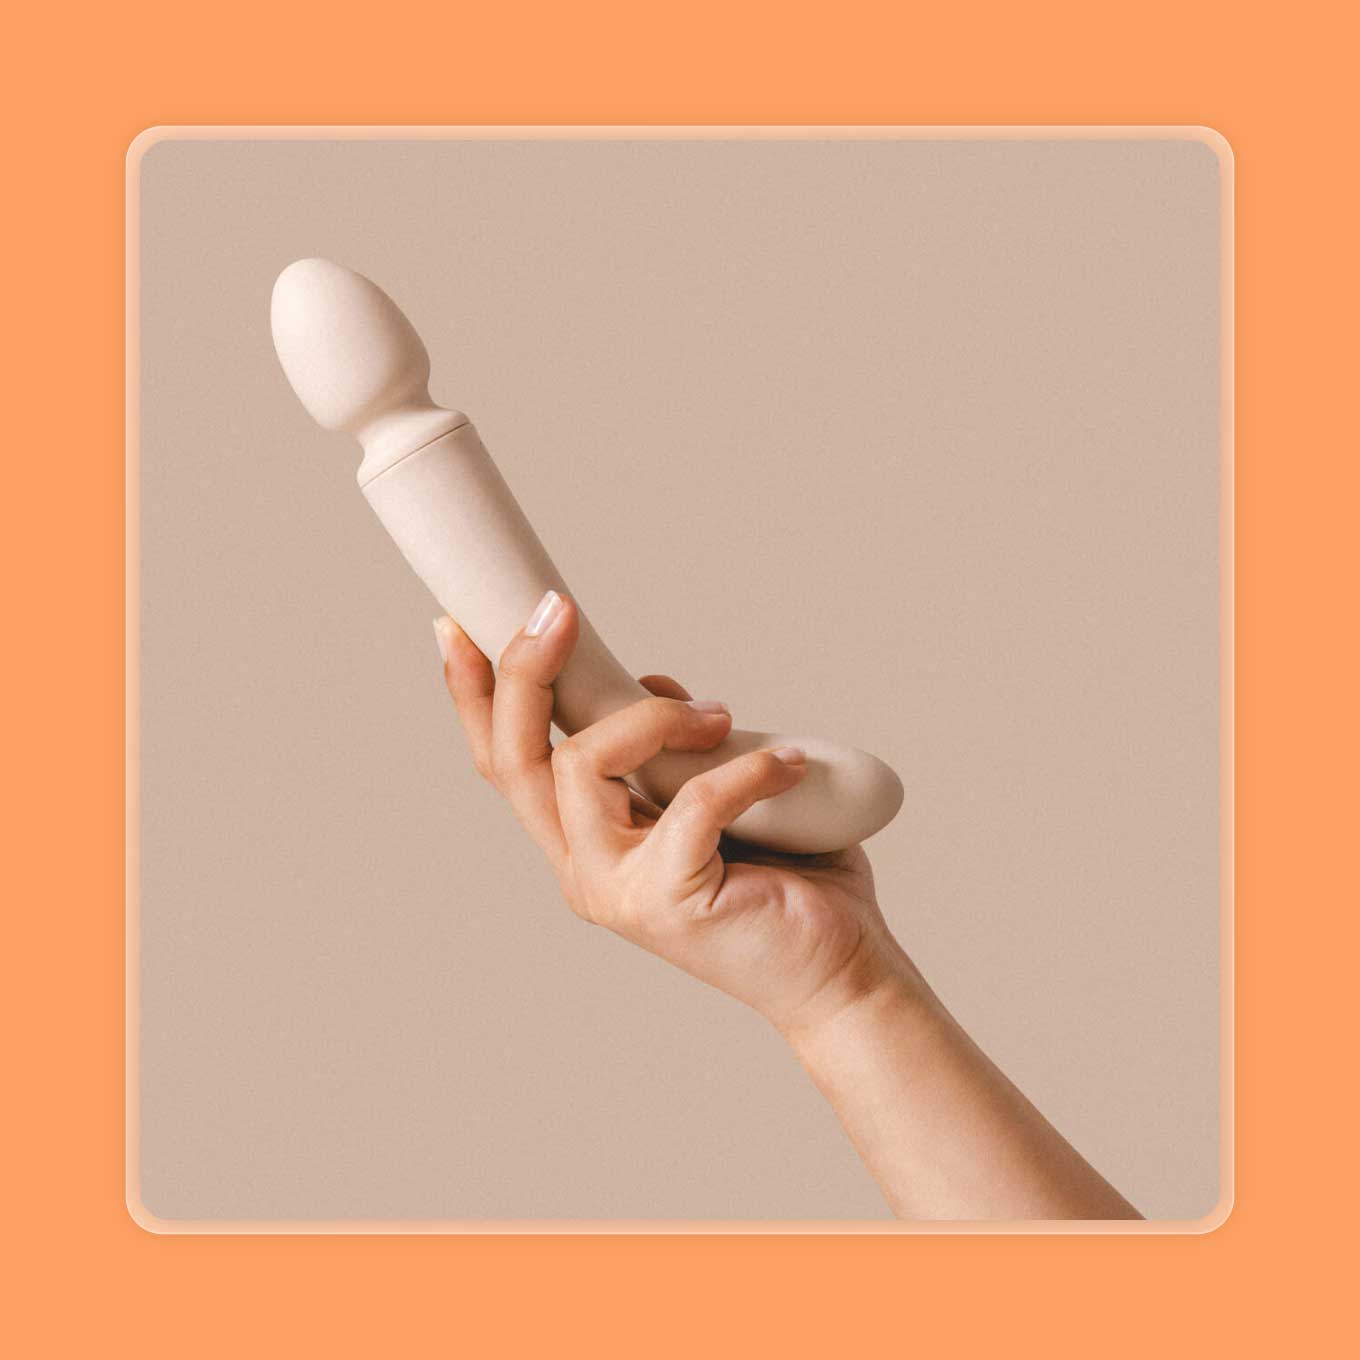 A hand holds up a white wand vibrator